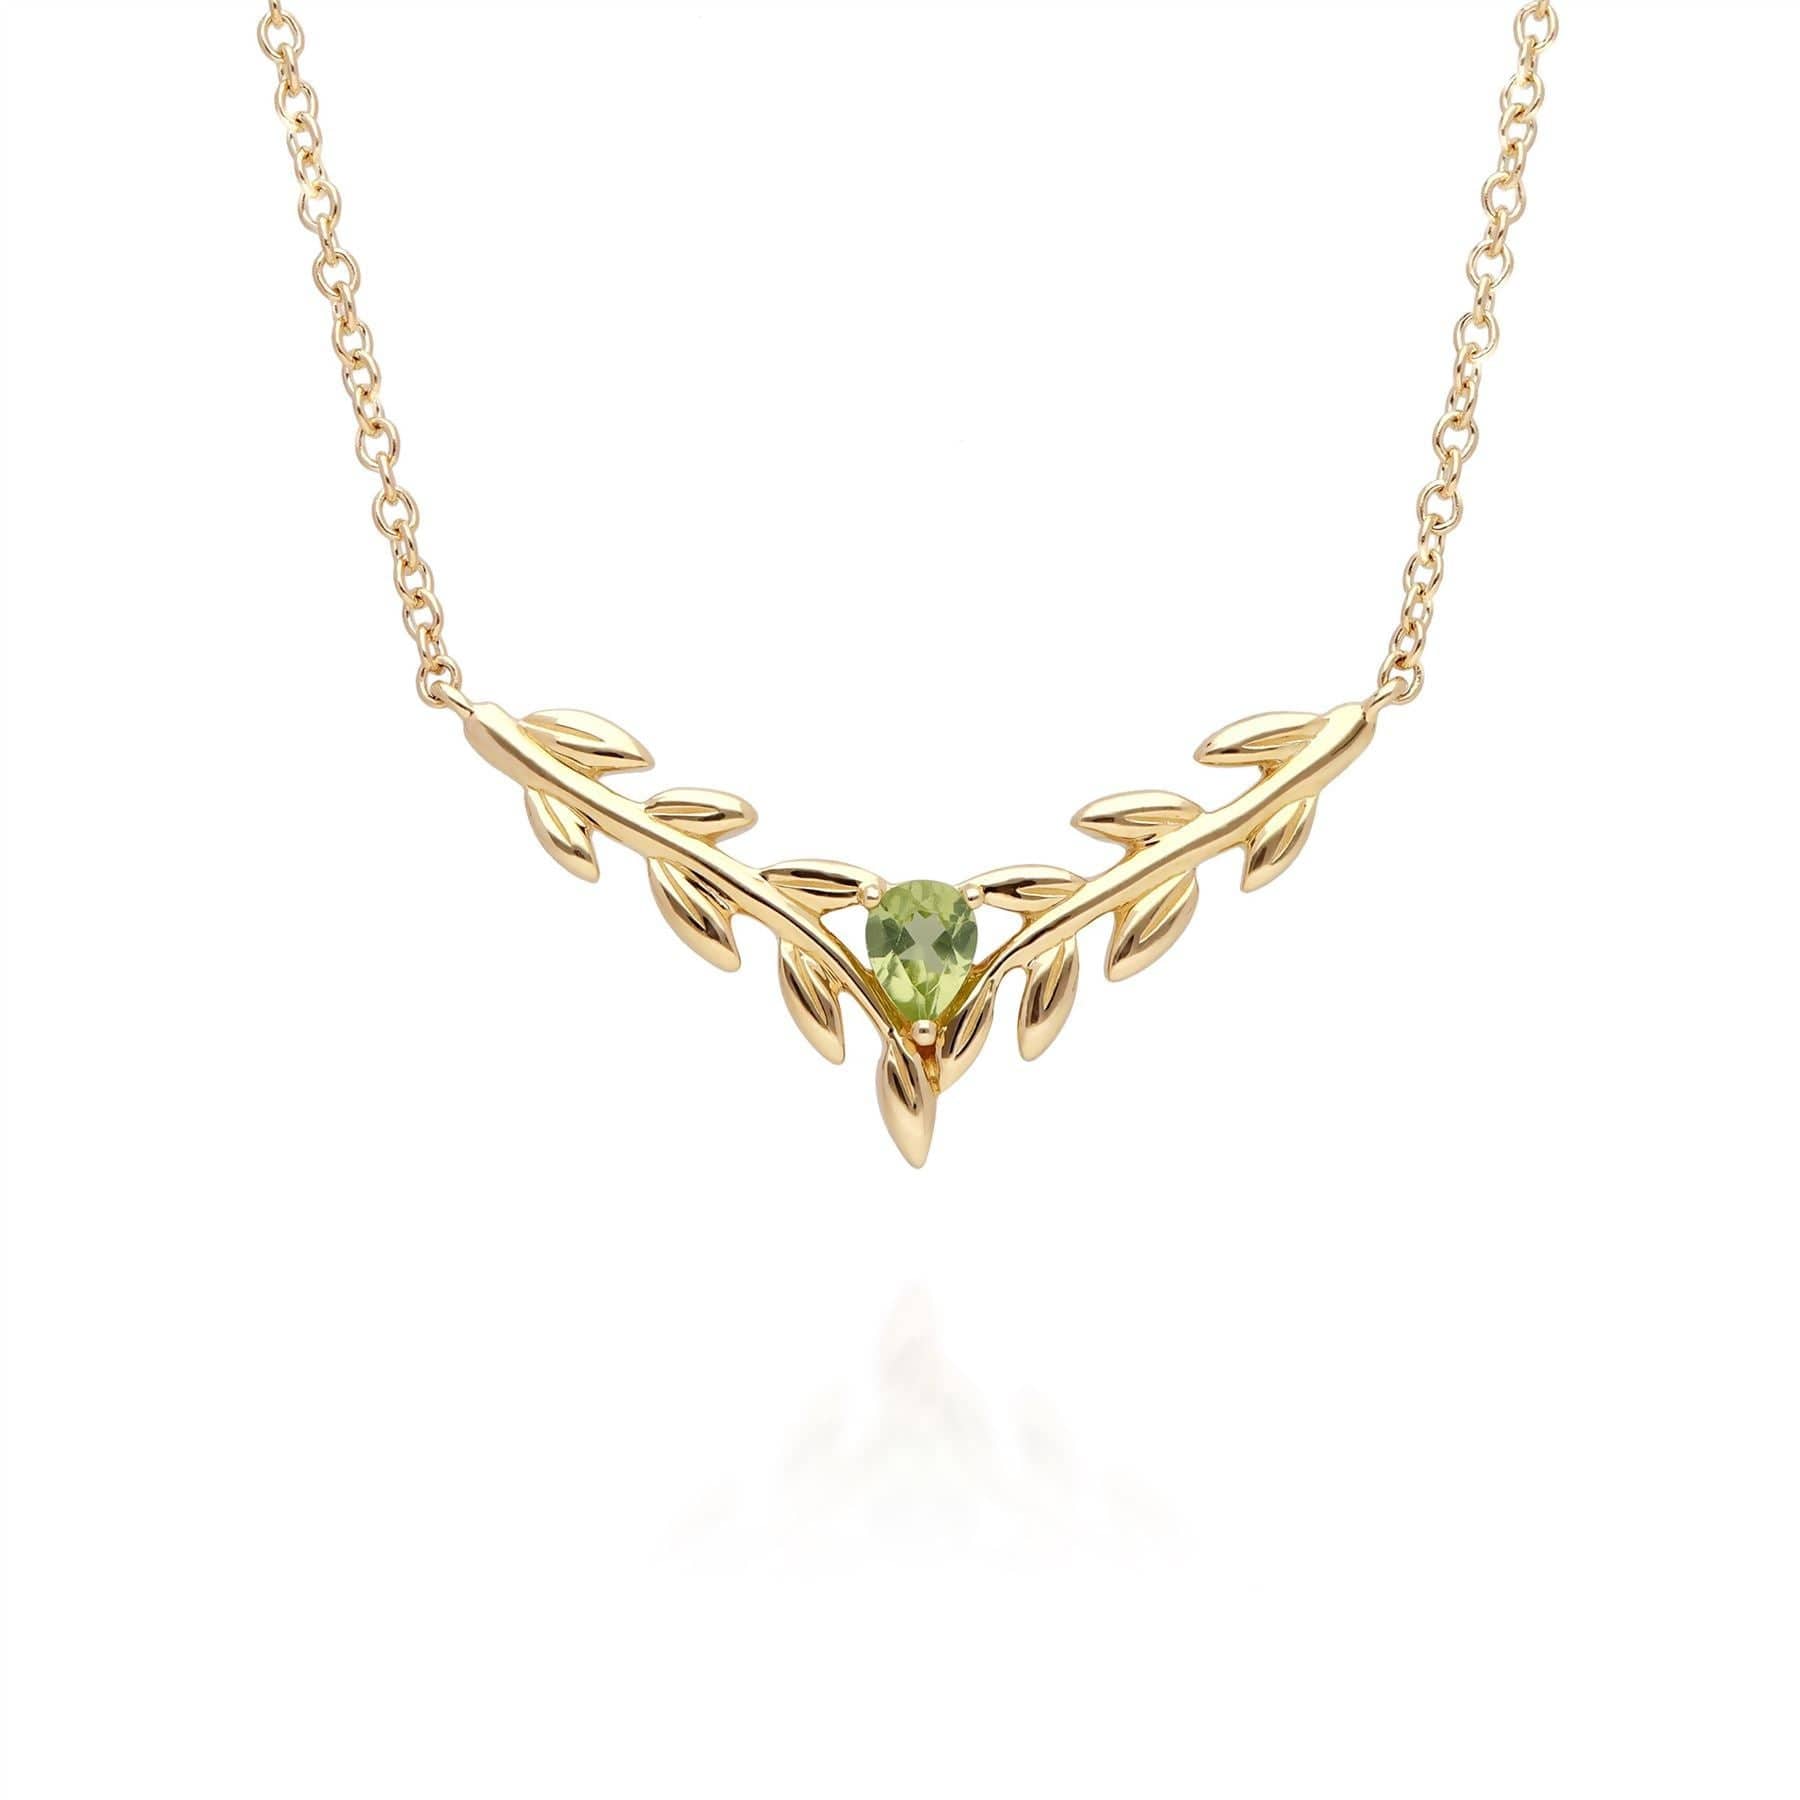 135N0366019-135E1674019 O Leaf Peridot Necklace & Stud Earring Set in 9ct Yellow Gold 2